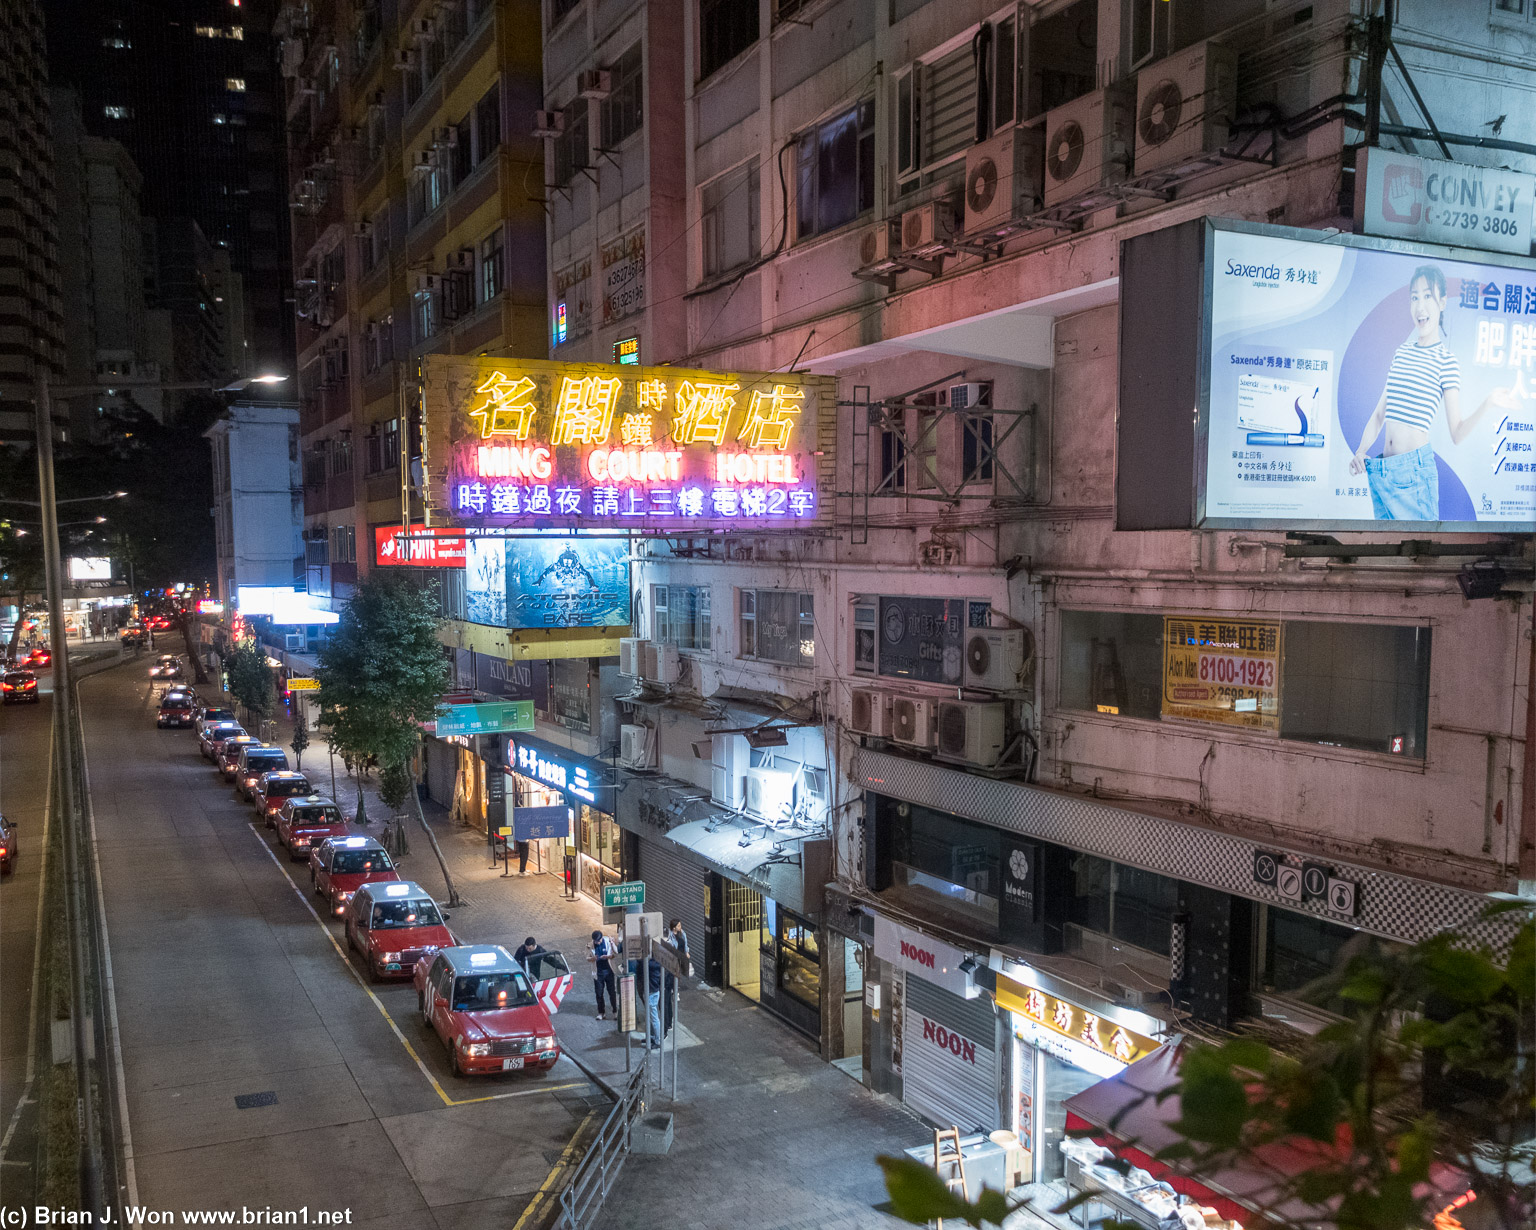 Sketchy hotels on the walk from MTR Wan Chai station.